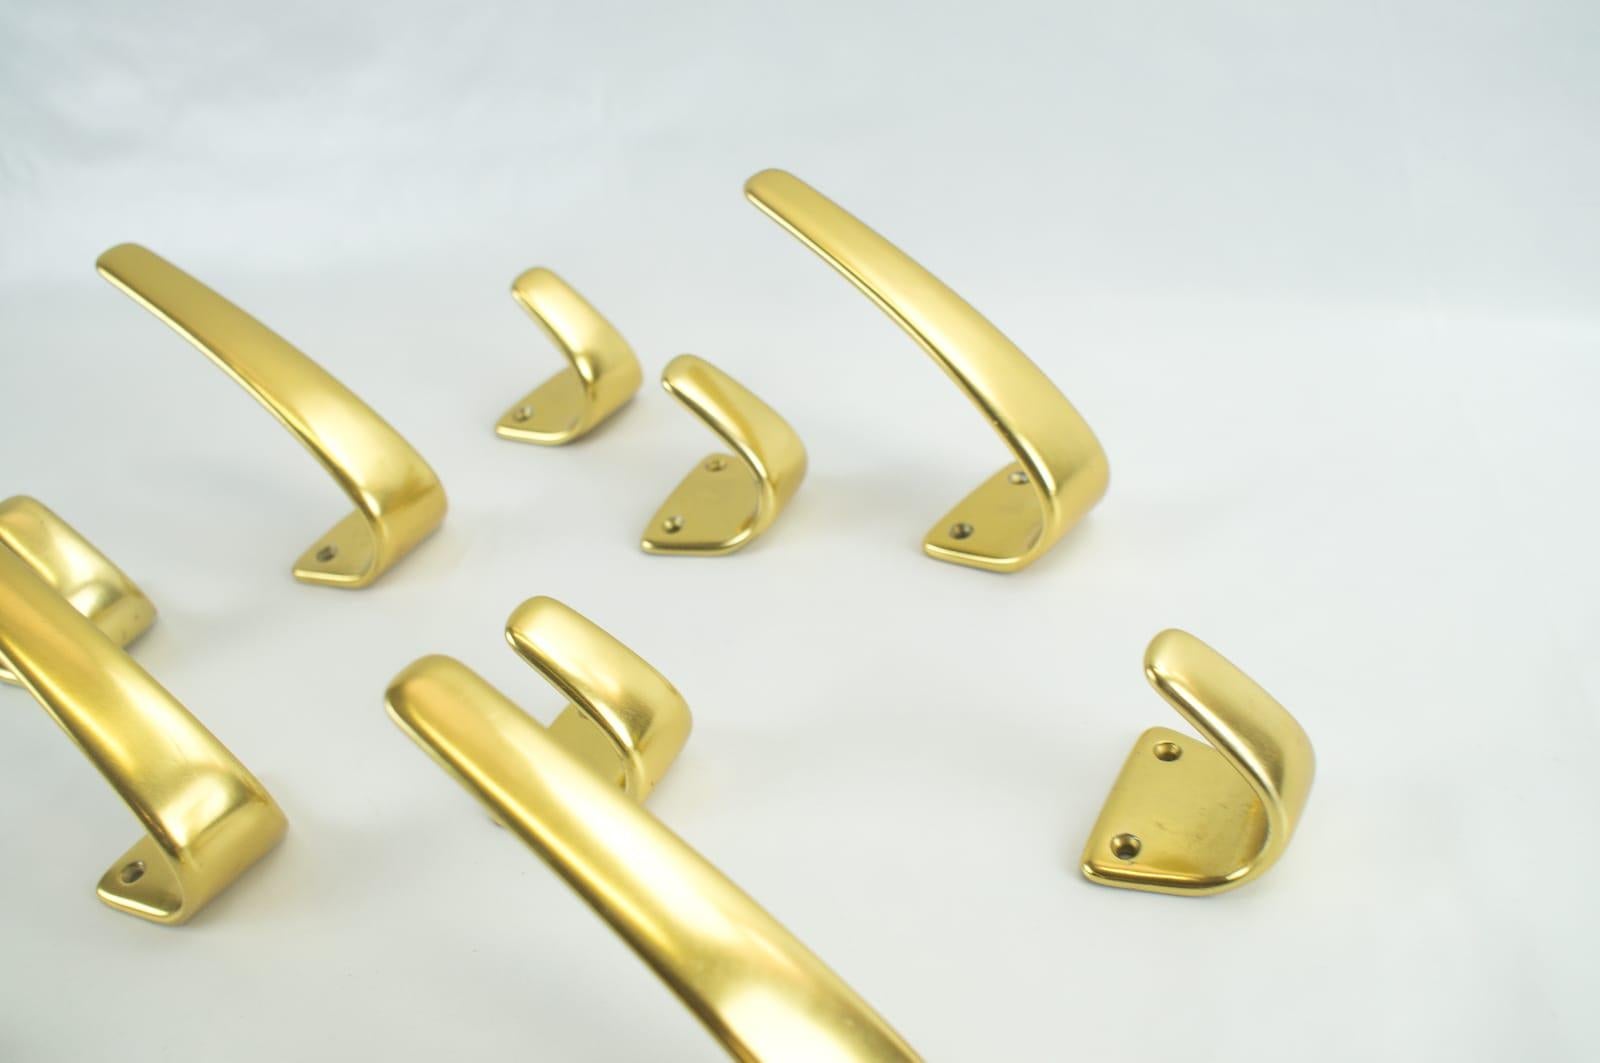 Set of 11 Midcentury Brass Wall Hooks Attributed to Carl Auböck, Austria, 1950s (Messing)